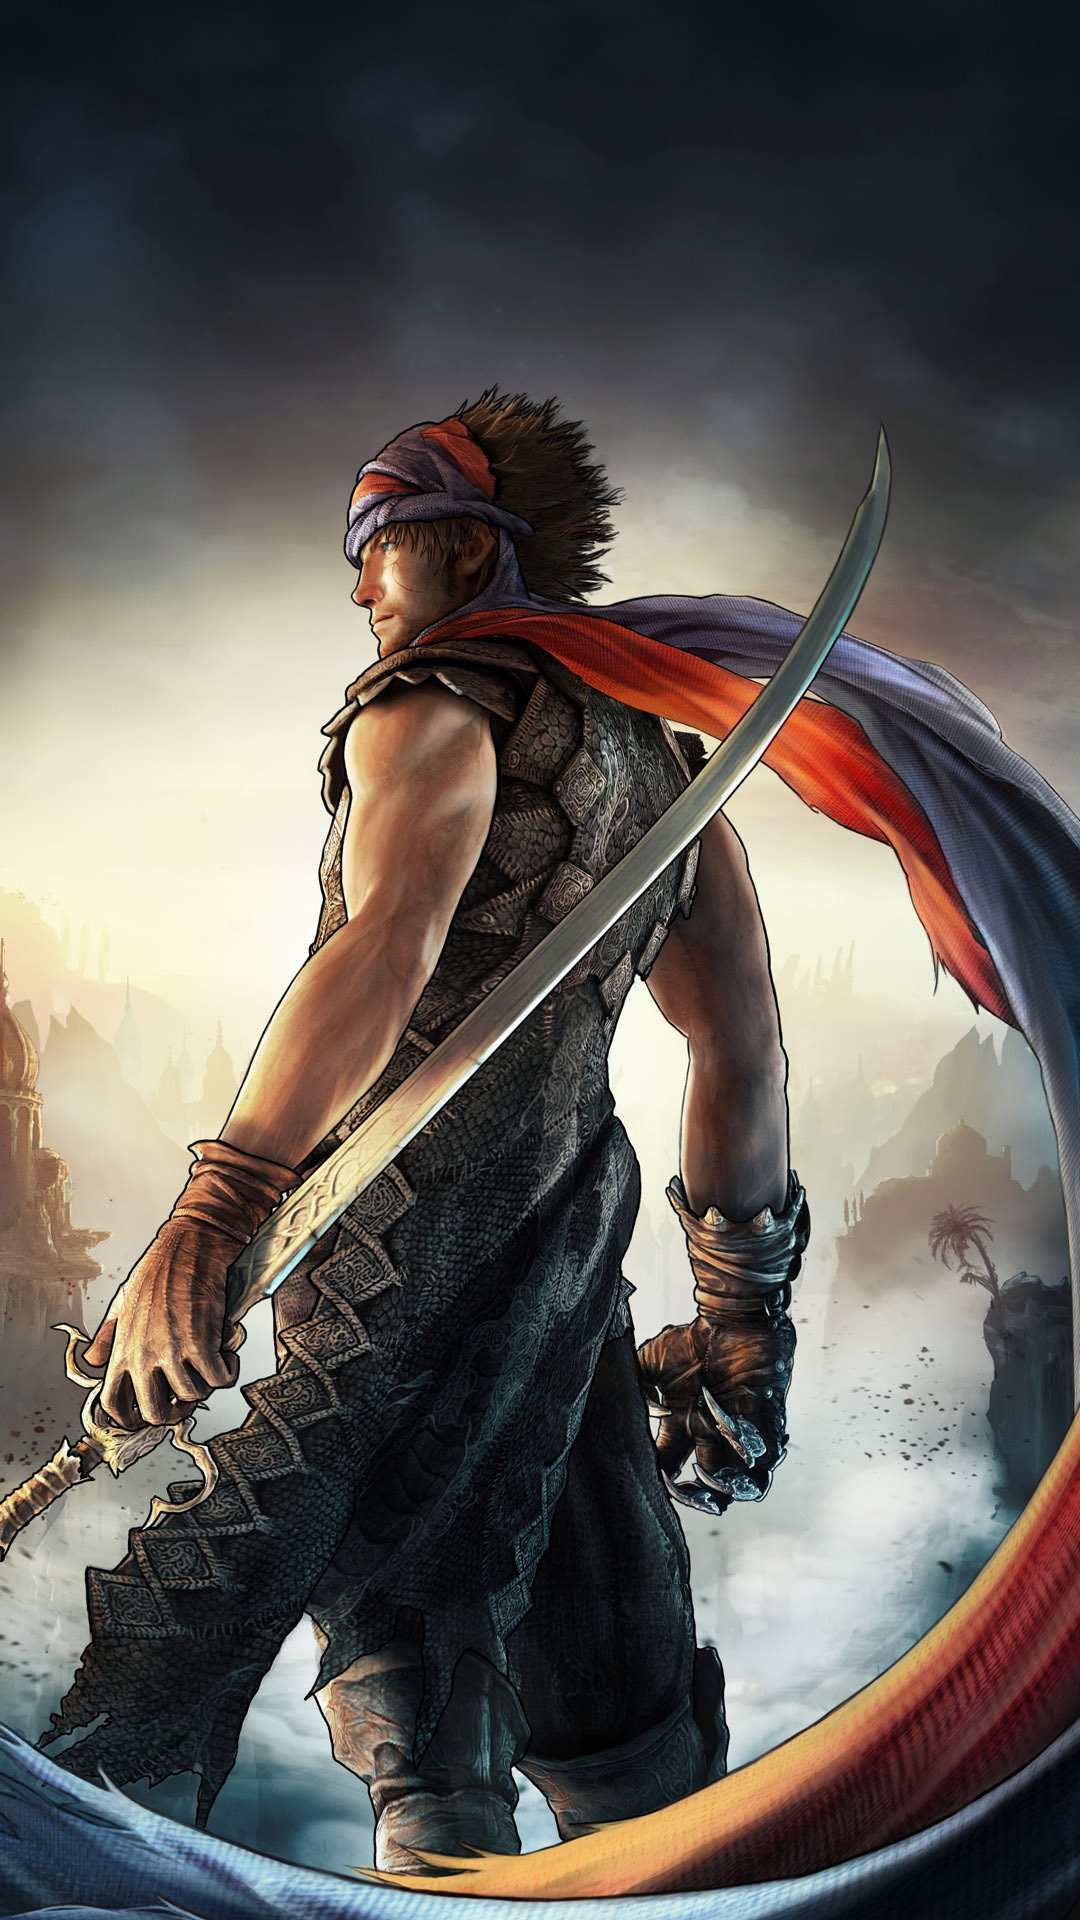 HD iPhone Wallpaper For Prince Of Persia